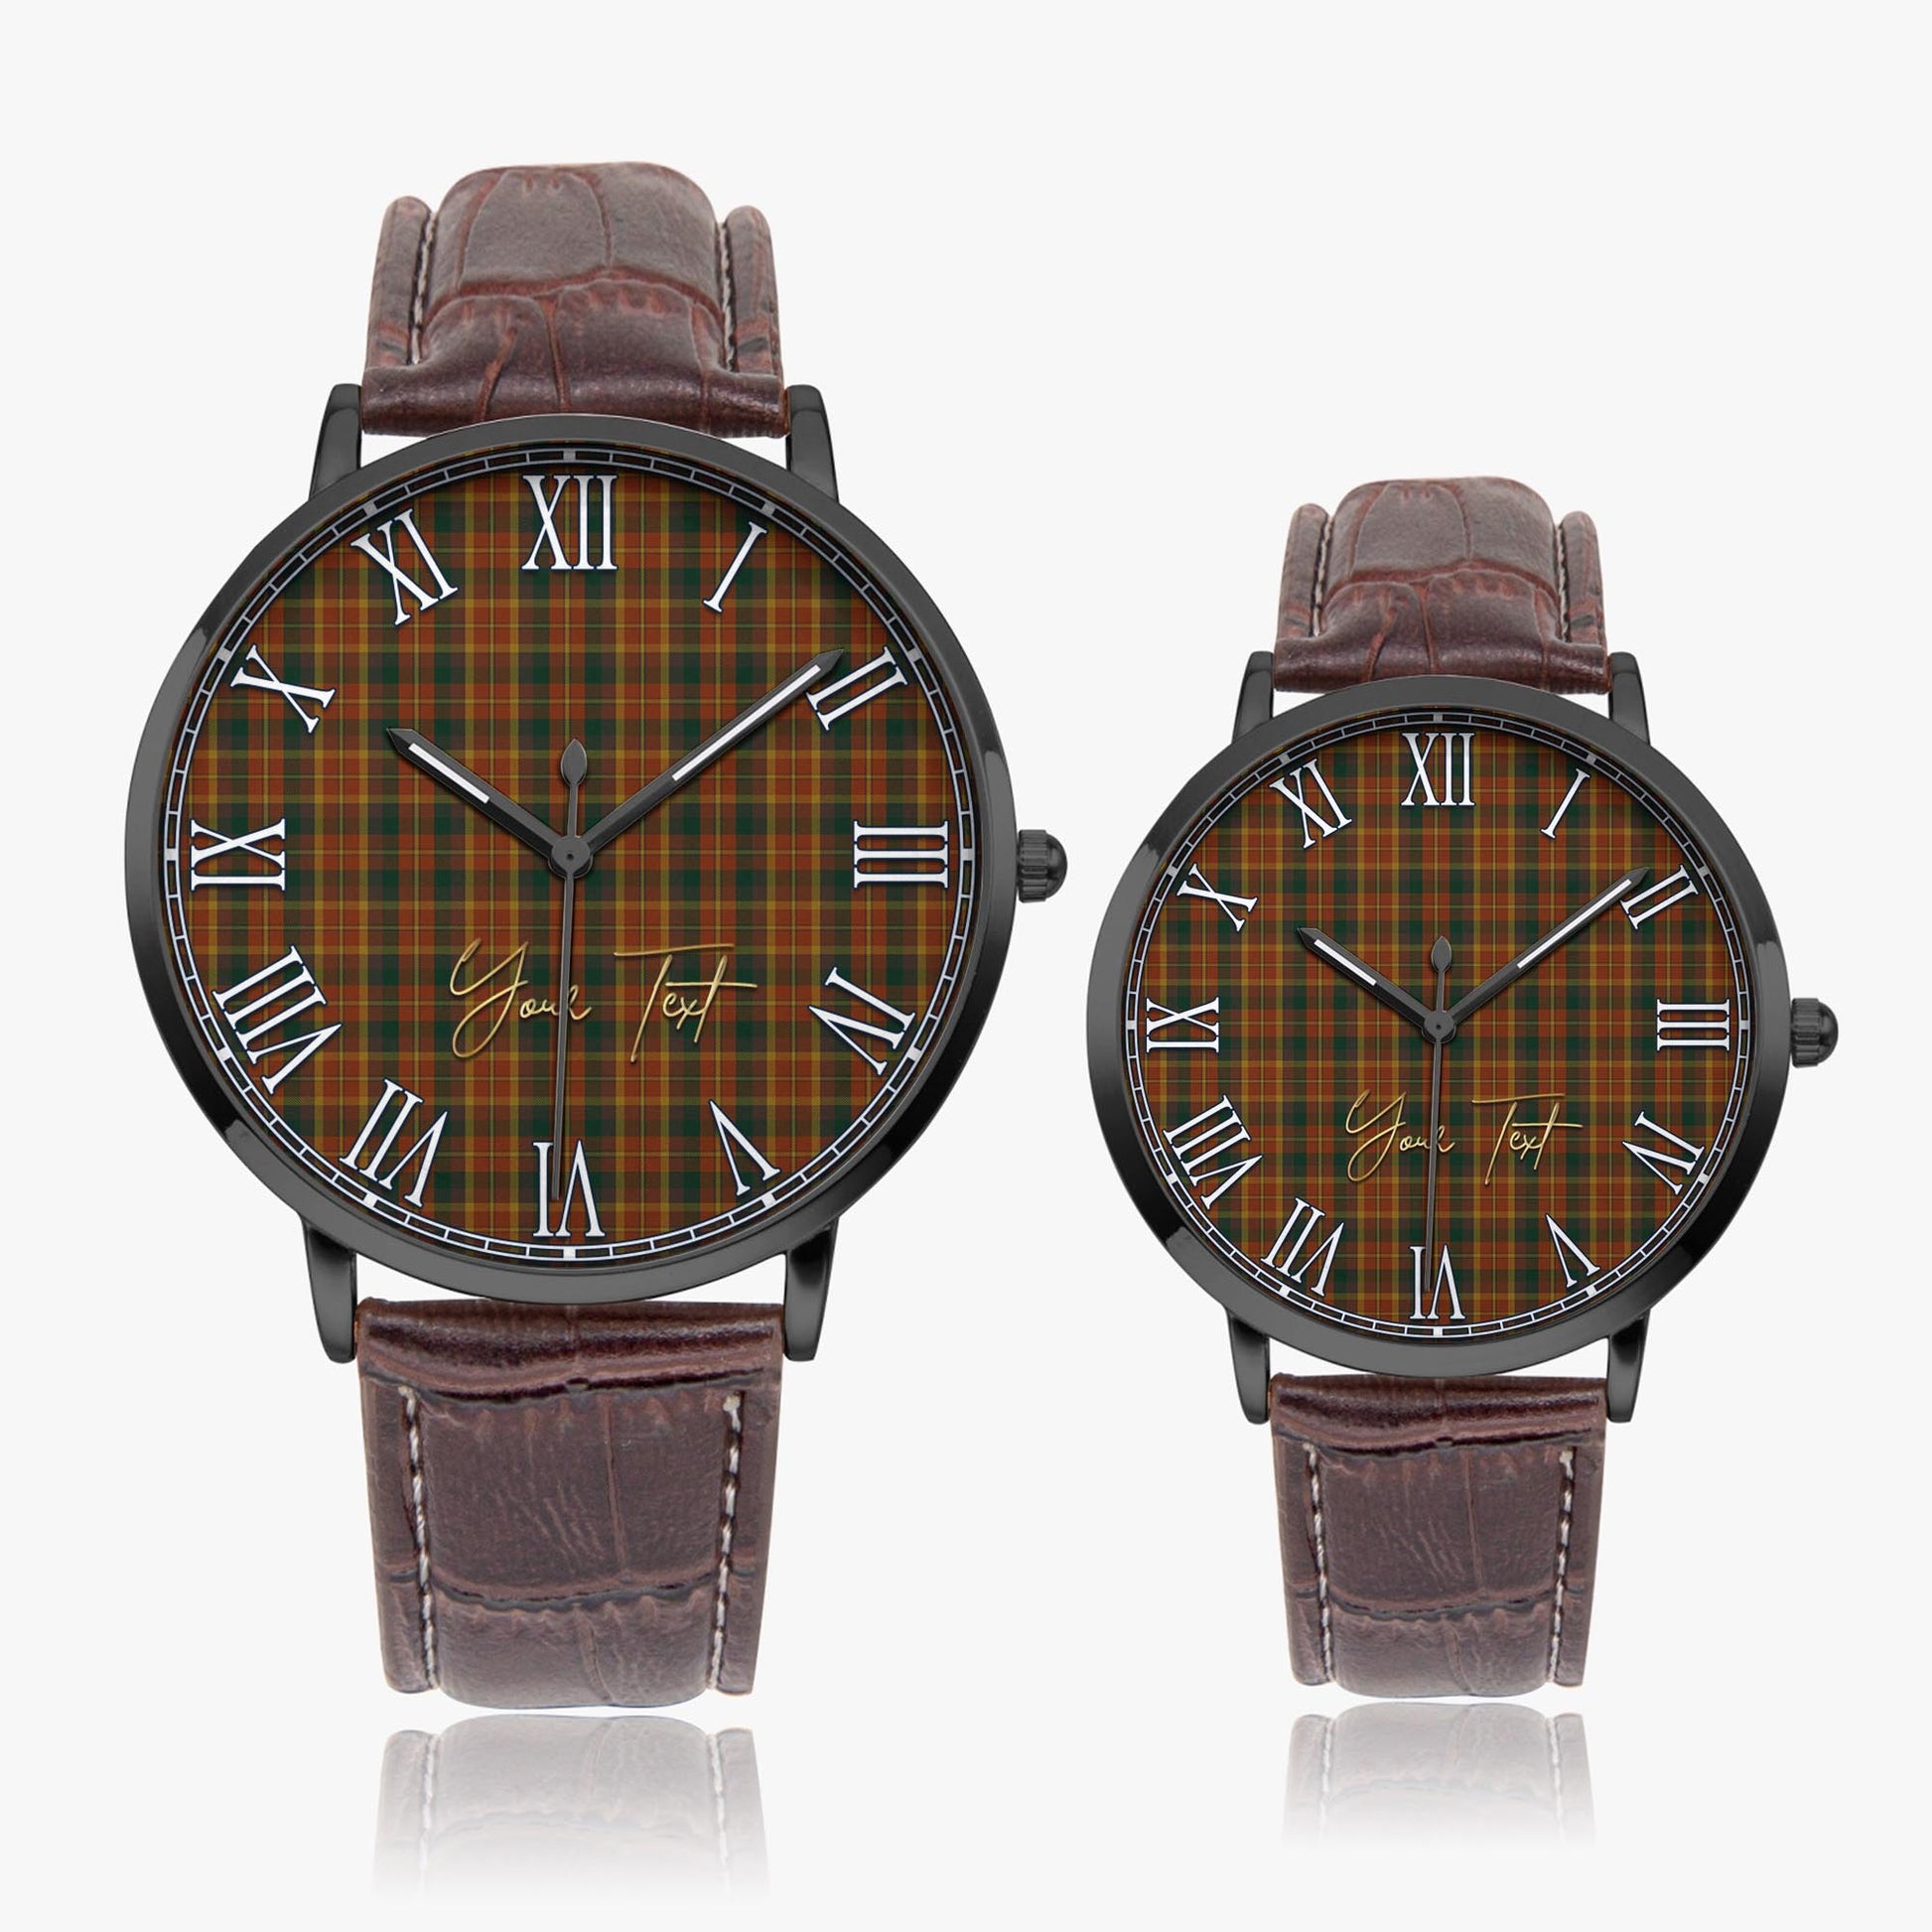 Monaghan County Ireland Tartan Personalized Your Text Leather Trap Quartz Watch Ultra Thin Black Case With Brown Leather Strap - Tartanvibesclothing